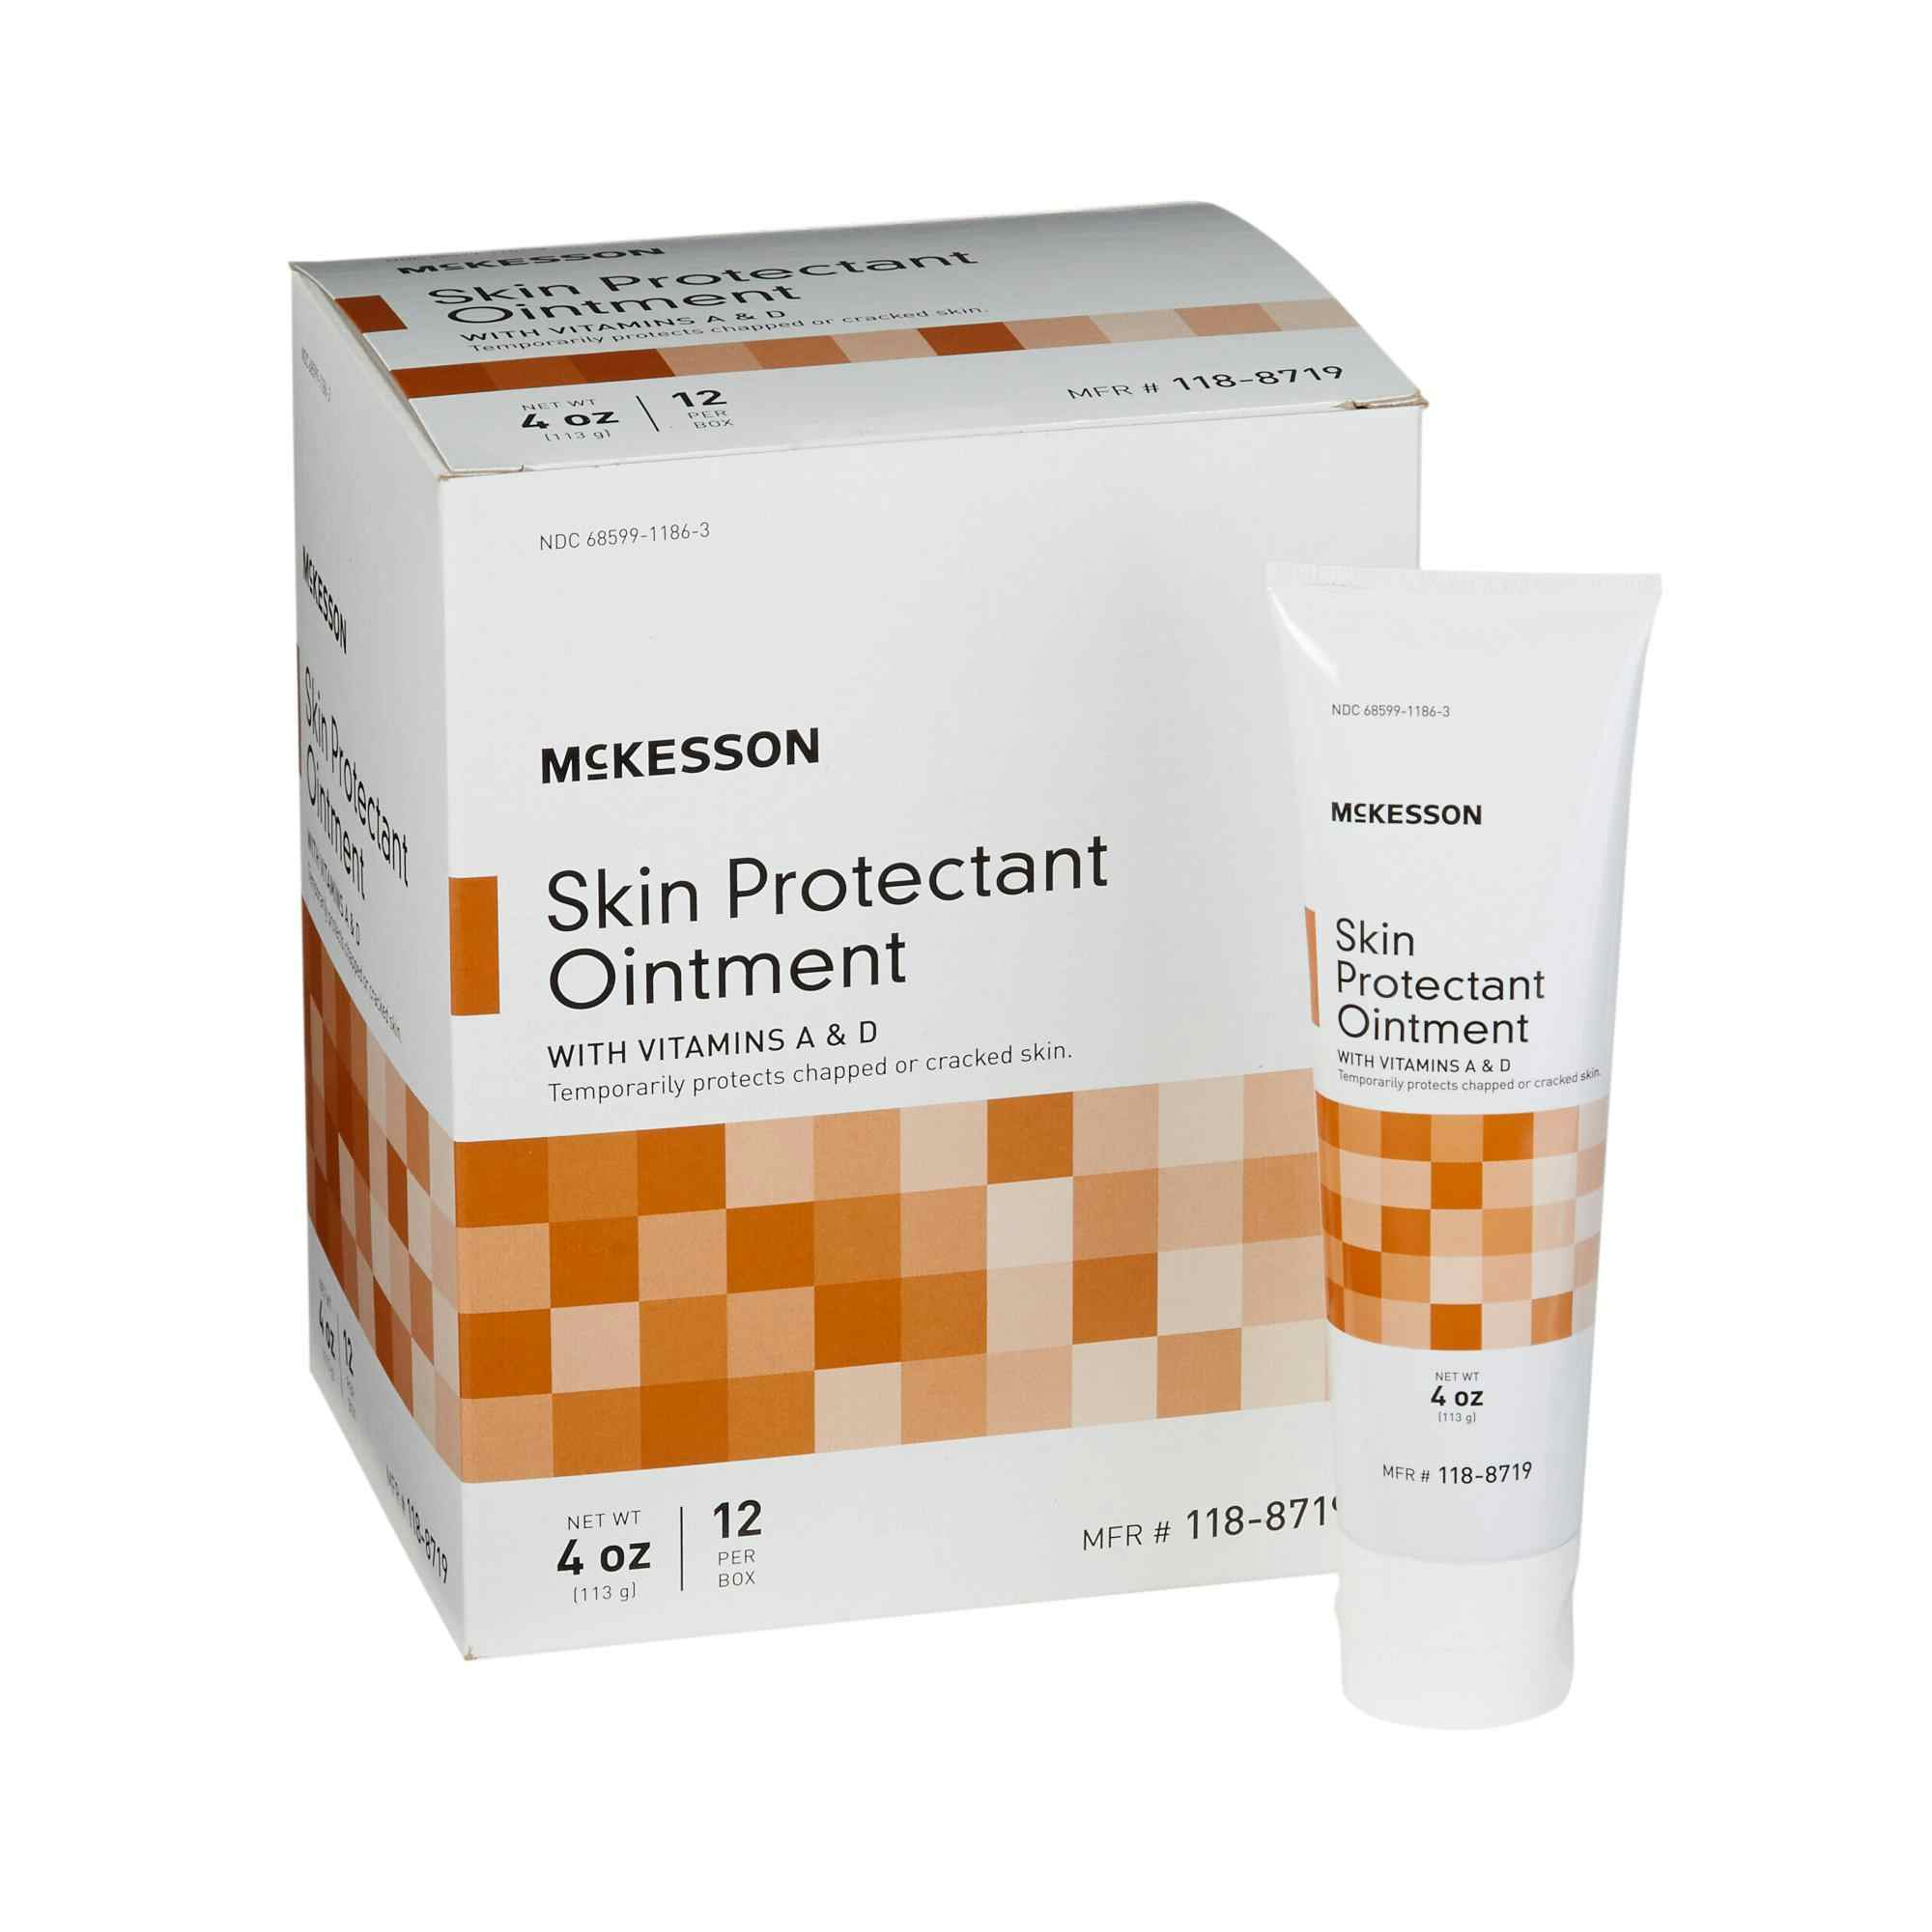 McKesson Skin Protectant Ointment